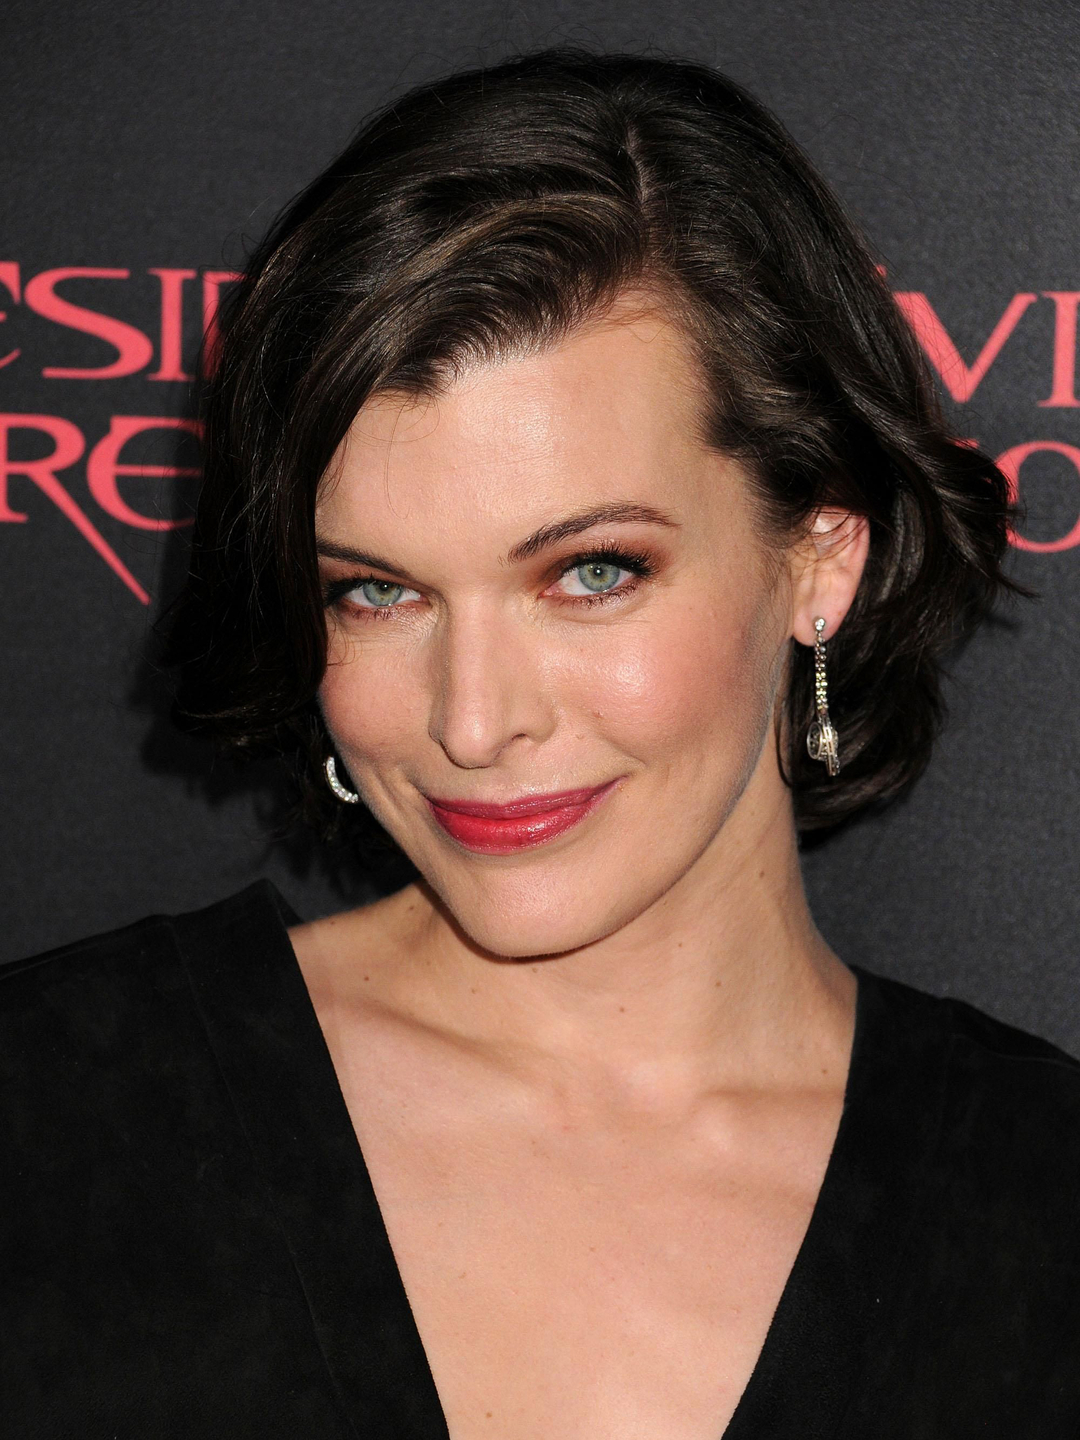 Milla Jovovich who is her father